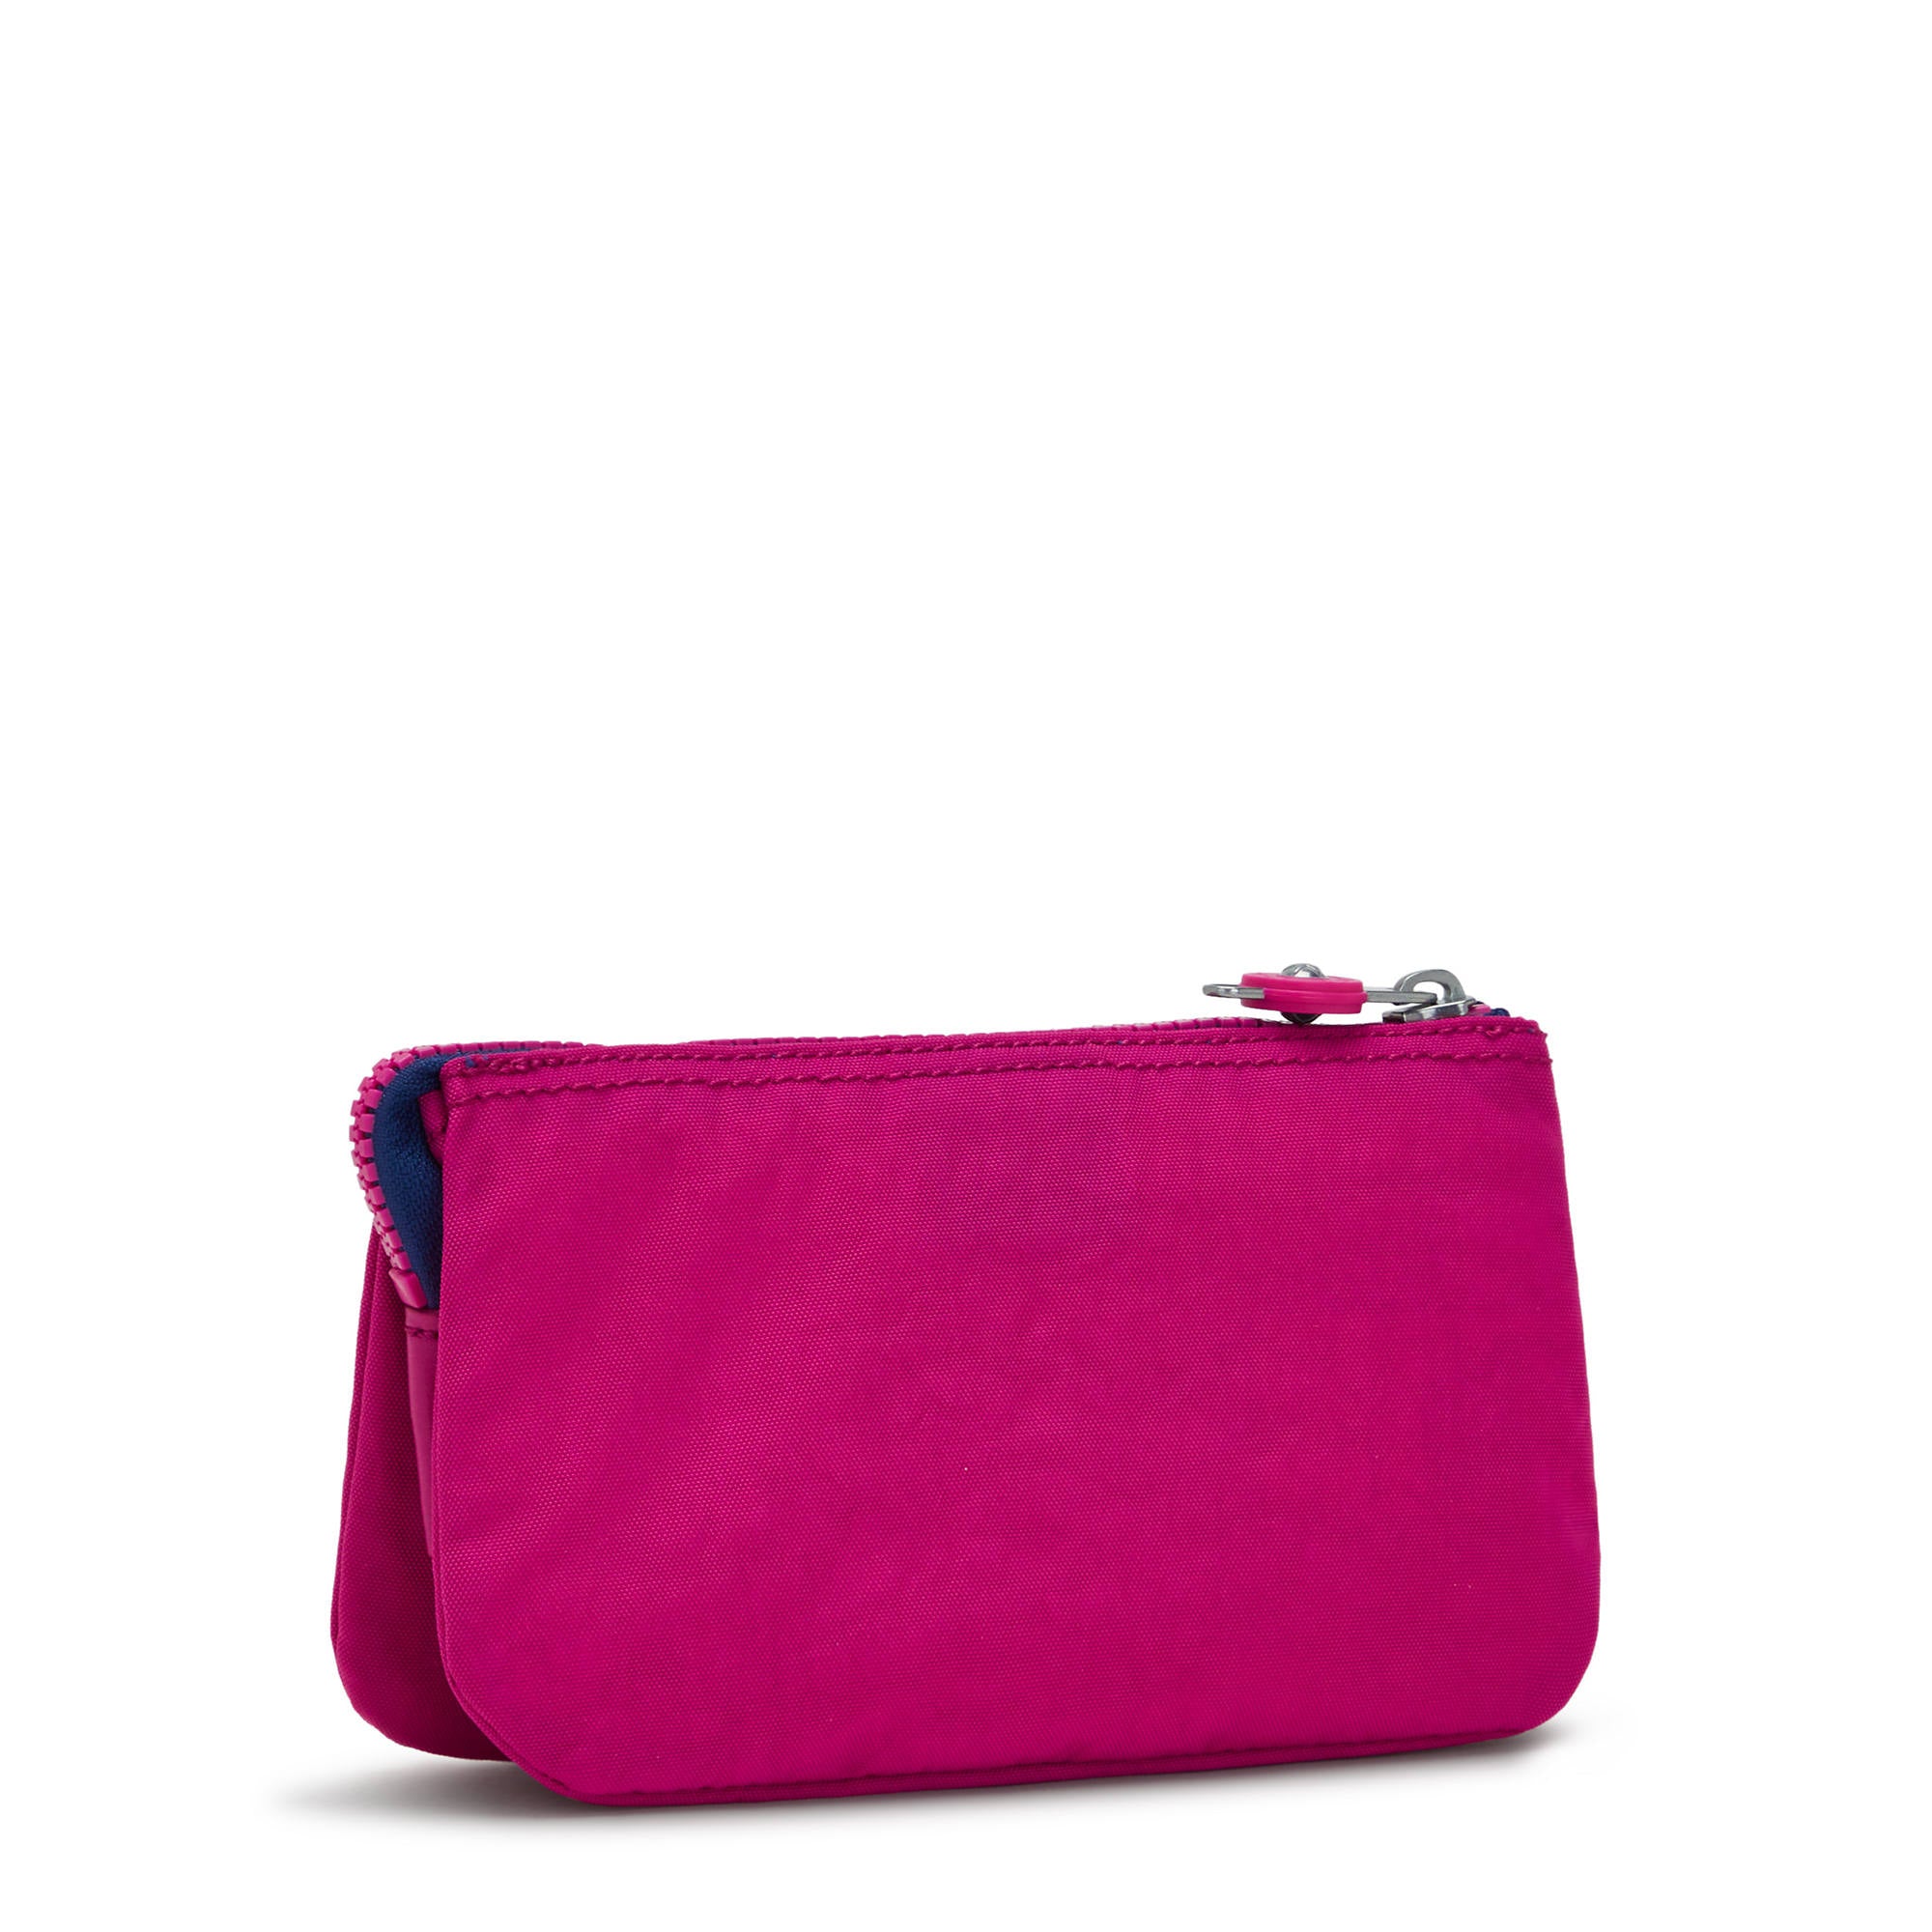 Kipling purse deal: Save 25% on handbags and totes right now